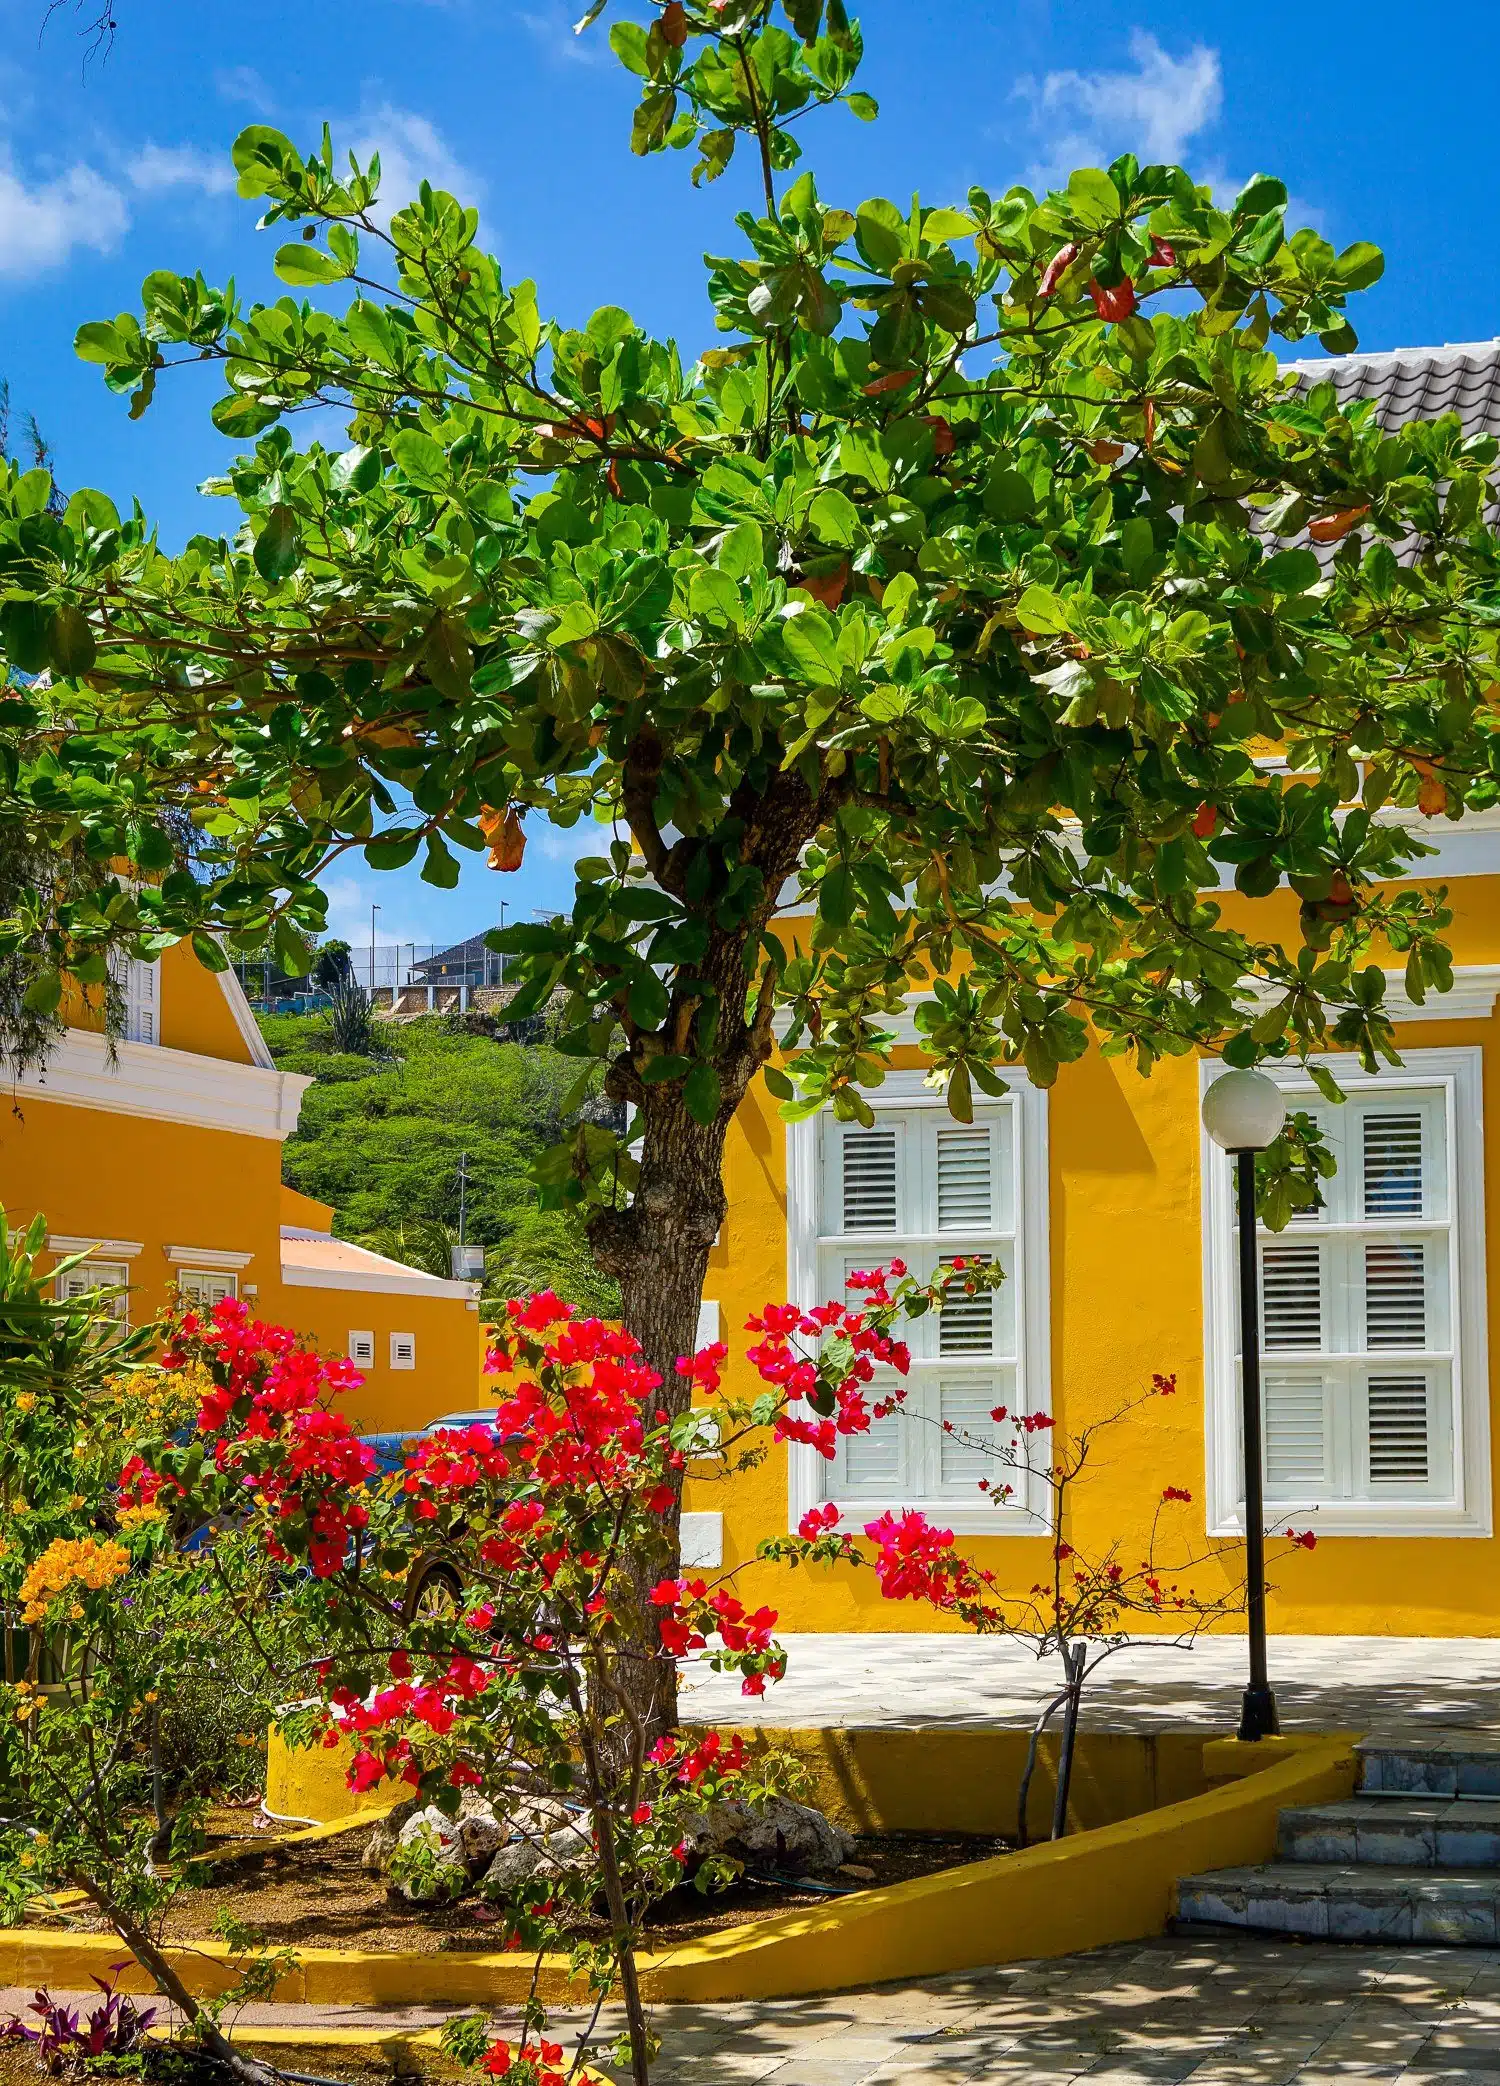 Willemstad, Curaçao has great architecture, and the Scharloo neighborhood features historic mansions that look like brightly-colored wedding cakes! See these happy, fun buildings here.